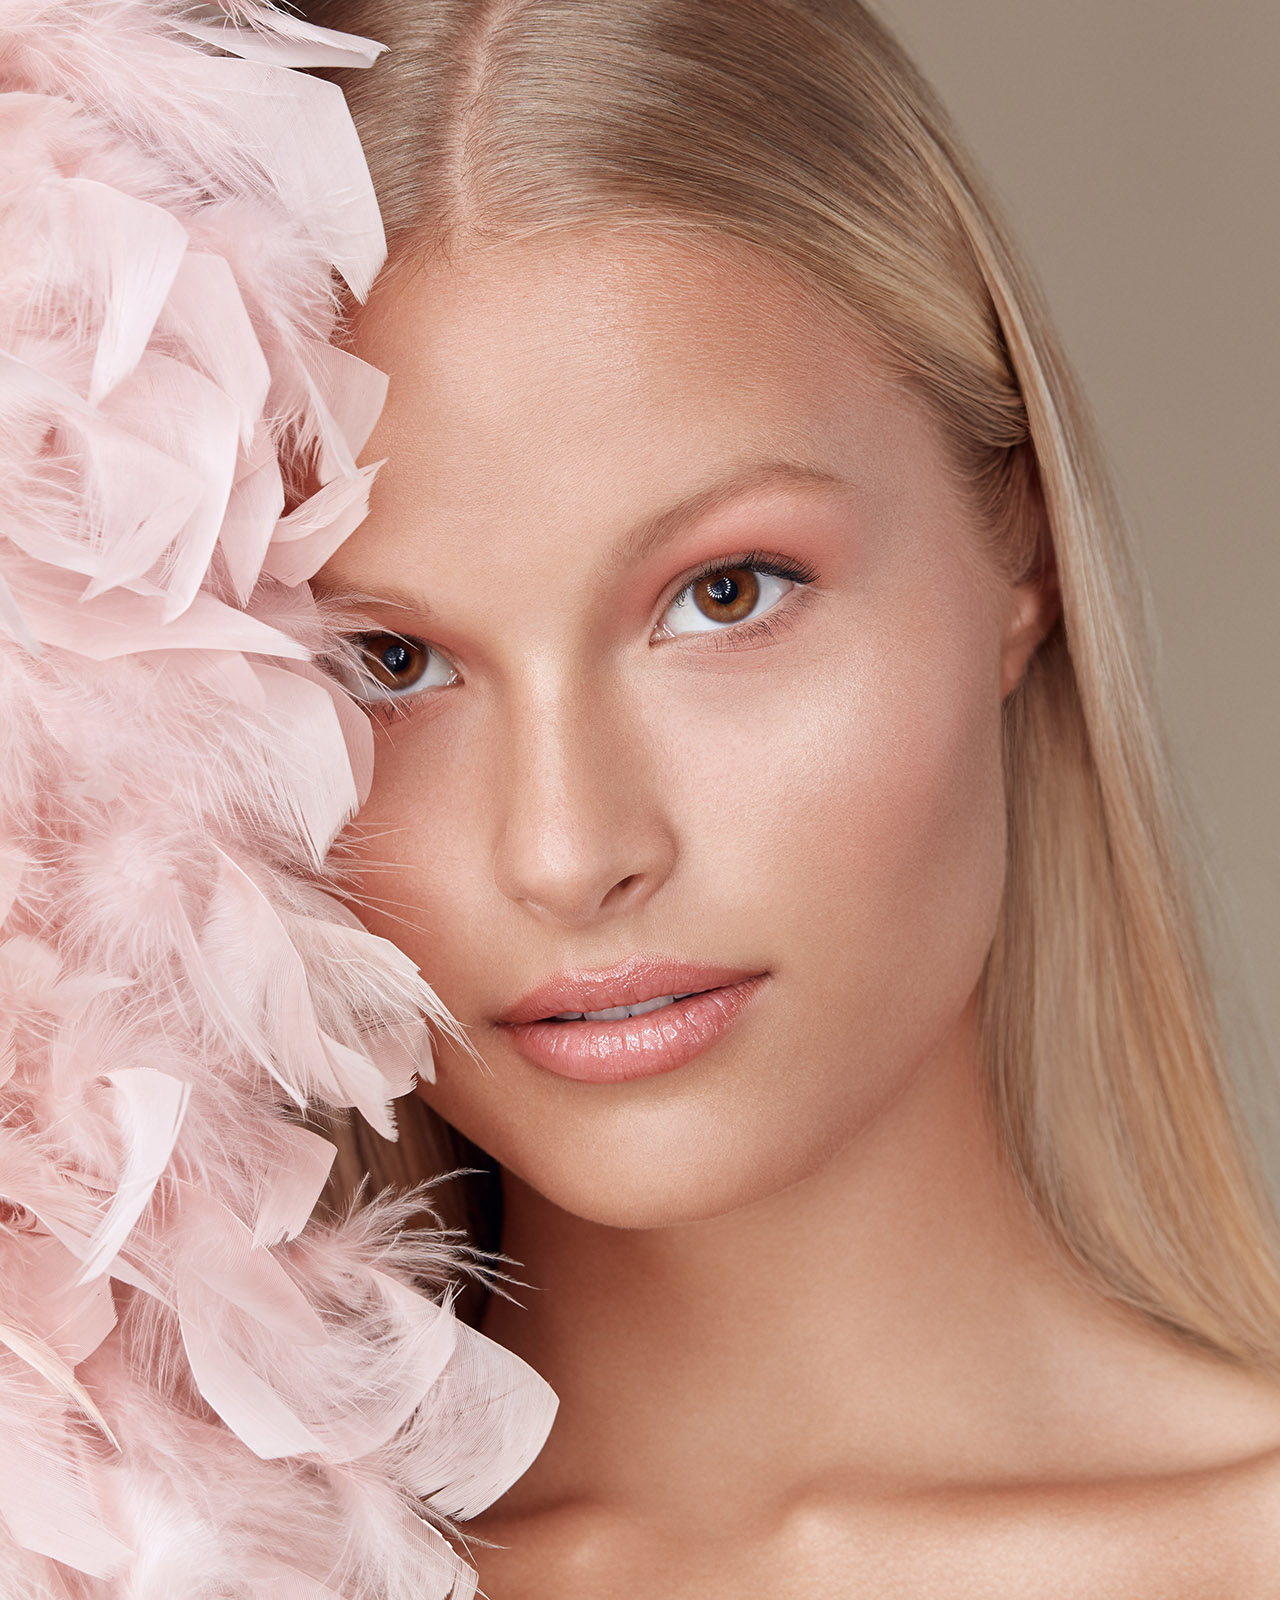 Beauty photography of blonde woman with pink feathers